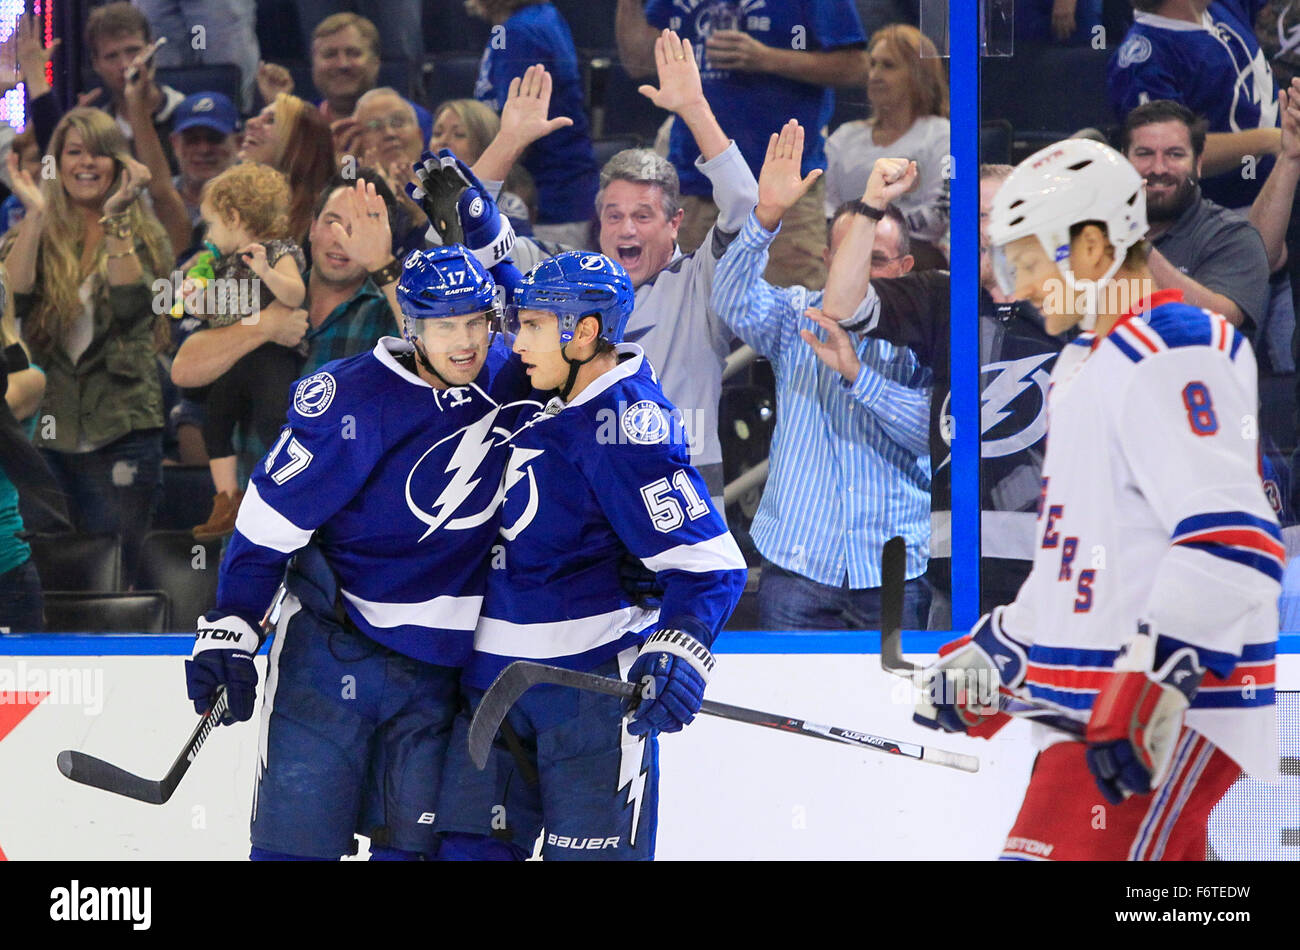 Tampa, Florida, USA. 19th Nov, 2015. DIRK SHADD | Times .Tampa Bay Lightning center Alex Killorn (17) celebrates scoring on a wrist shot along with center Valtteri Filppula (51) (right), who picked up the assist, as New York Rangers defenseman Kevin Klein (8) (right) skates off after beating New York Rangers goalie Henrik Lundqvist (30) for the first goal of the game during first period action at the Amalie Arena in Tampa Thursday evening (11/19/15) © Dirk Shadd/Tampa Bay Times/ZUMA Wire/Alamy Live News Stock Photo